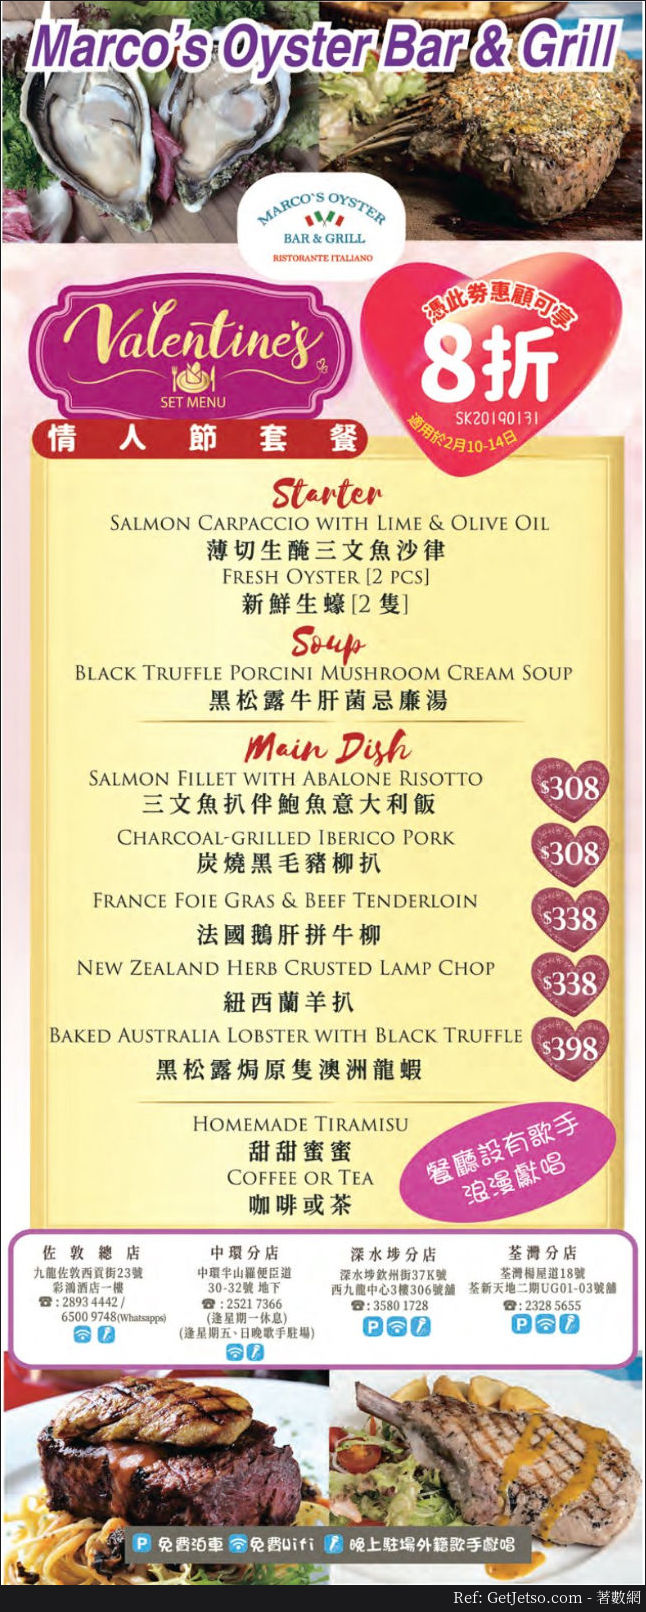 Marcos Oyster Bar & Grill 情人節套餐8折優惠(19年2月10-14日)圖片1